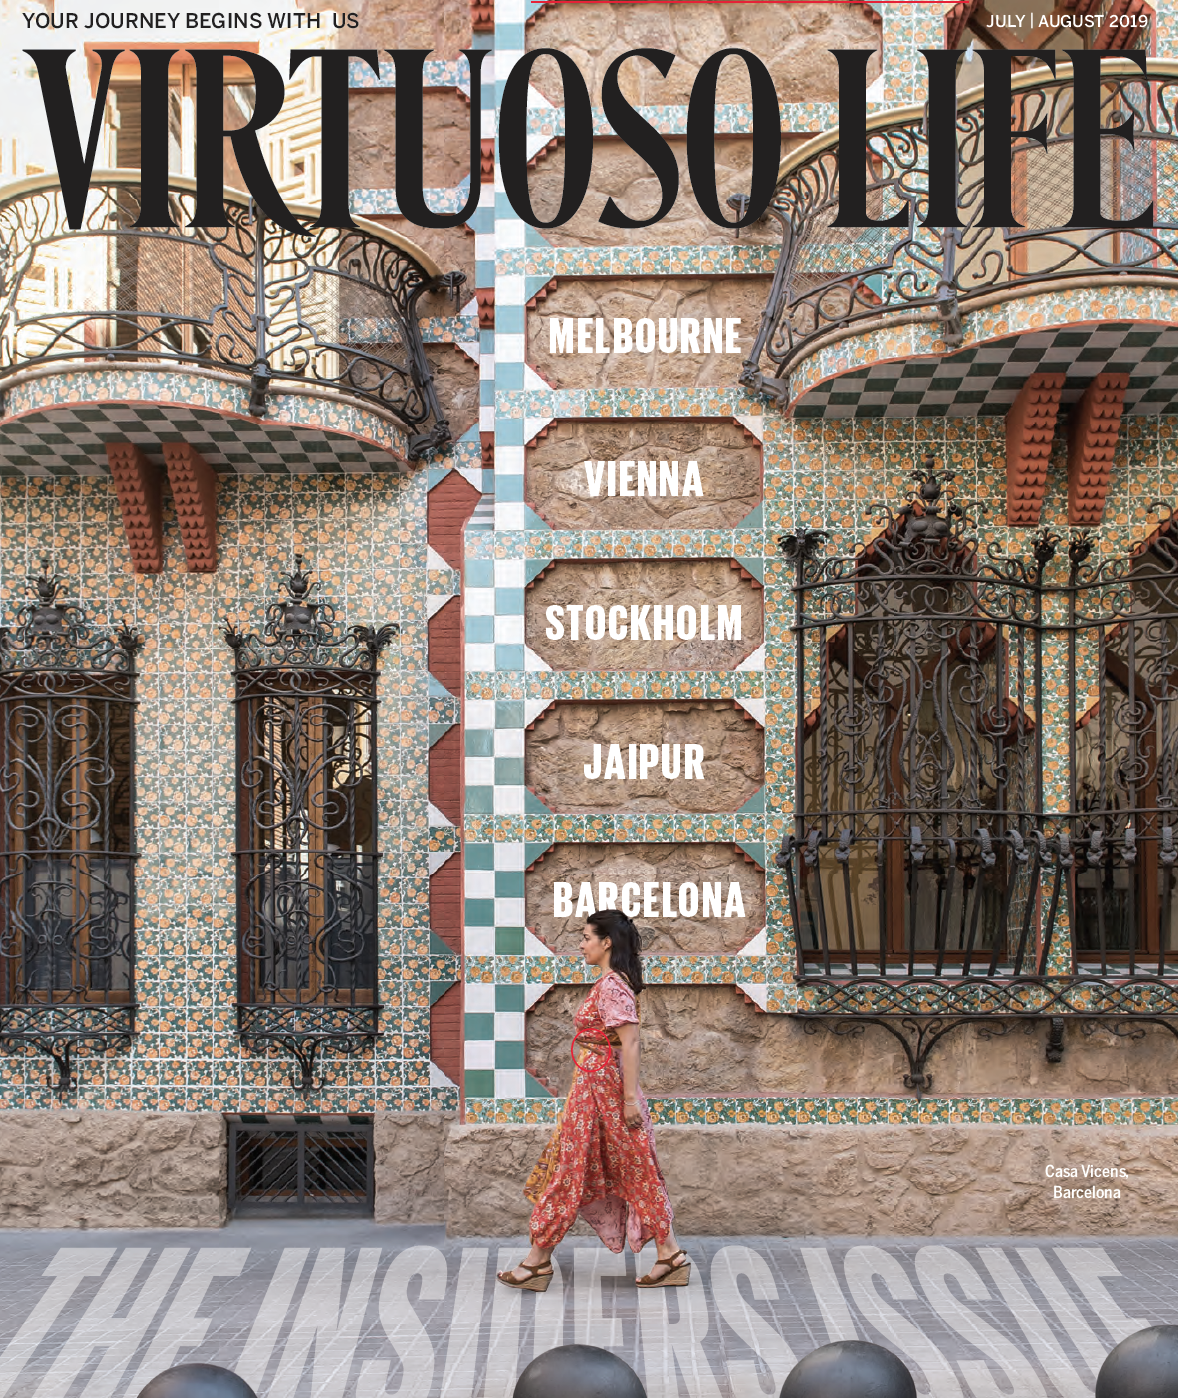 Virtuoso Life: Where We Want to Be